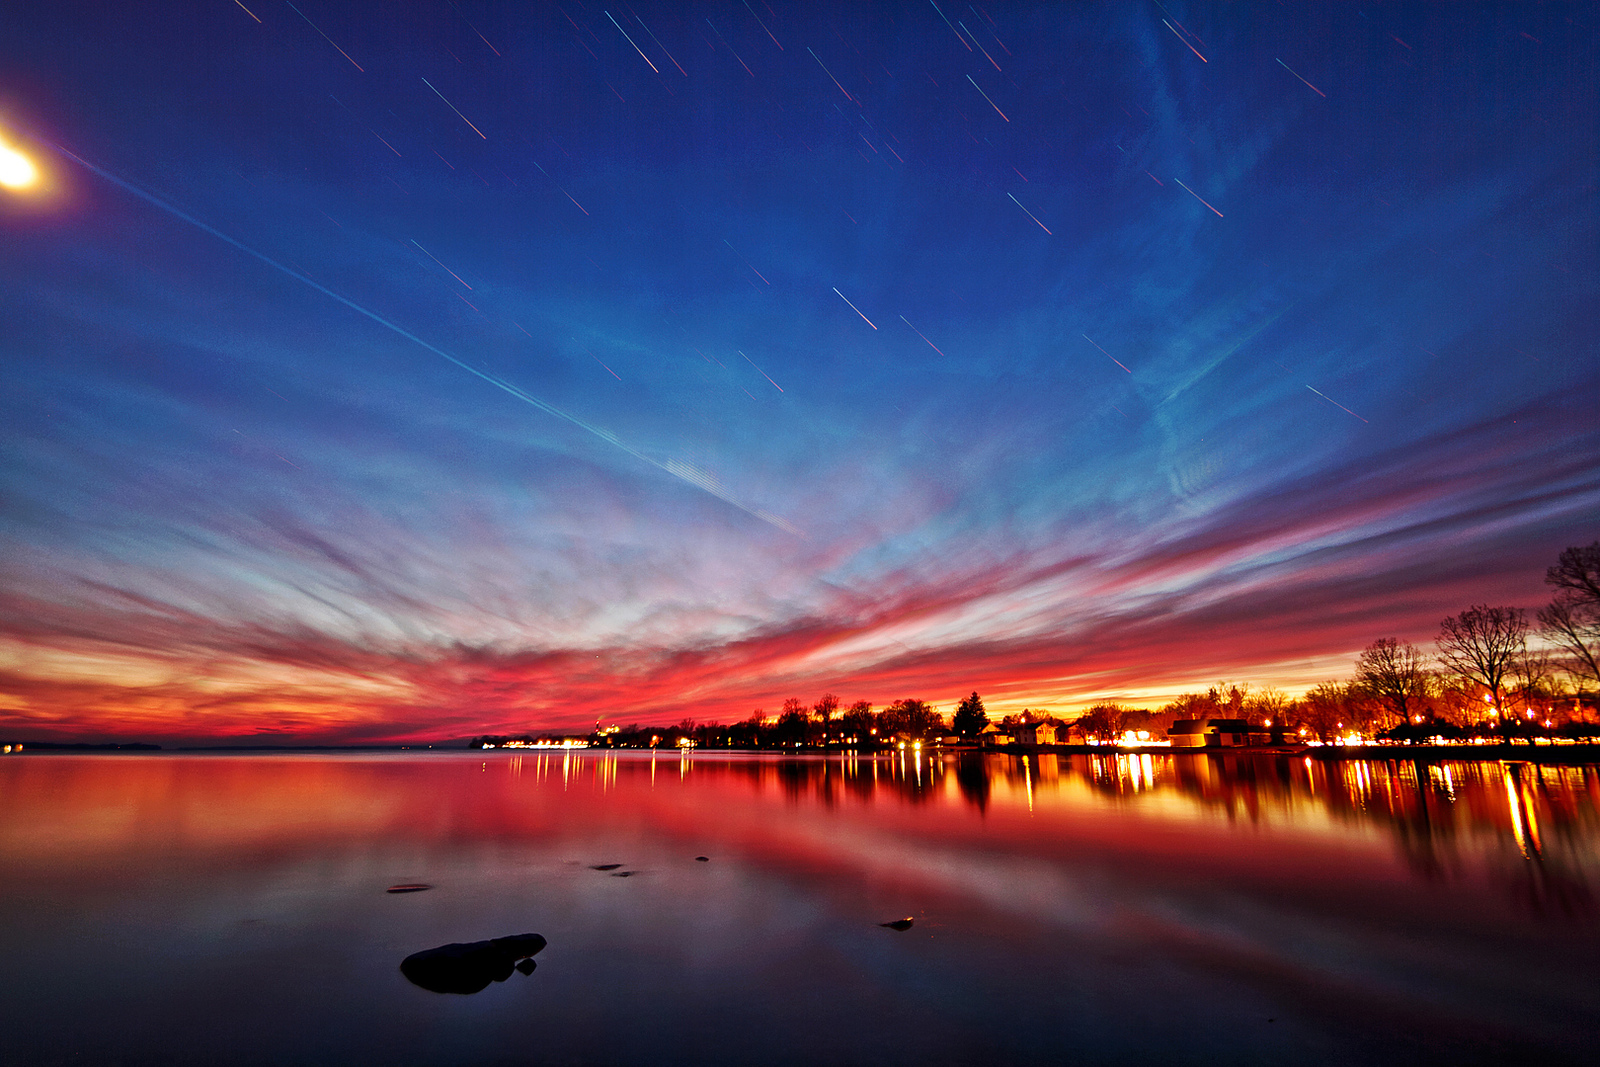 Painted Skies Using Hundreds of Time-Lapse Photographs